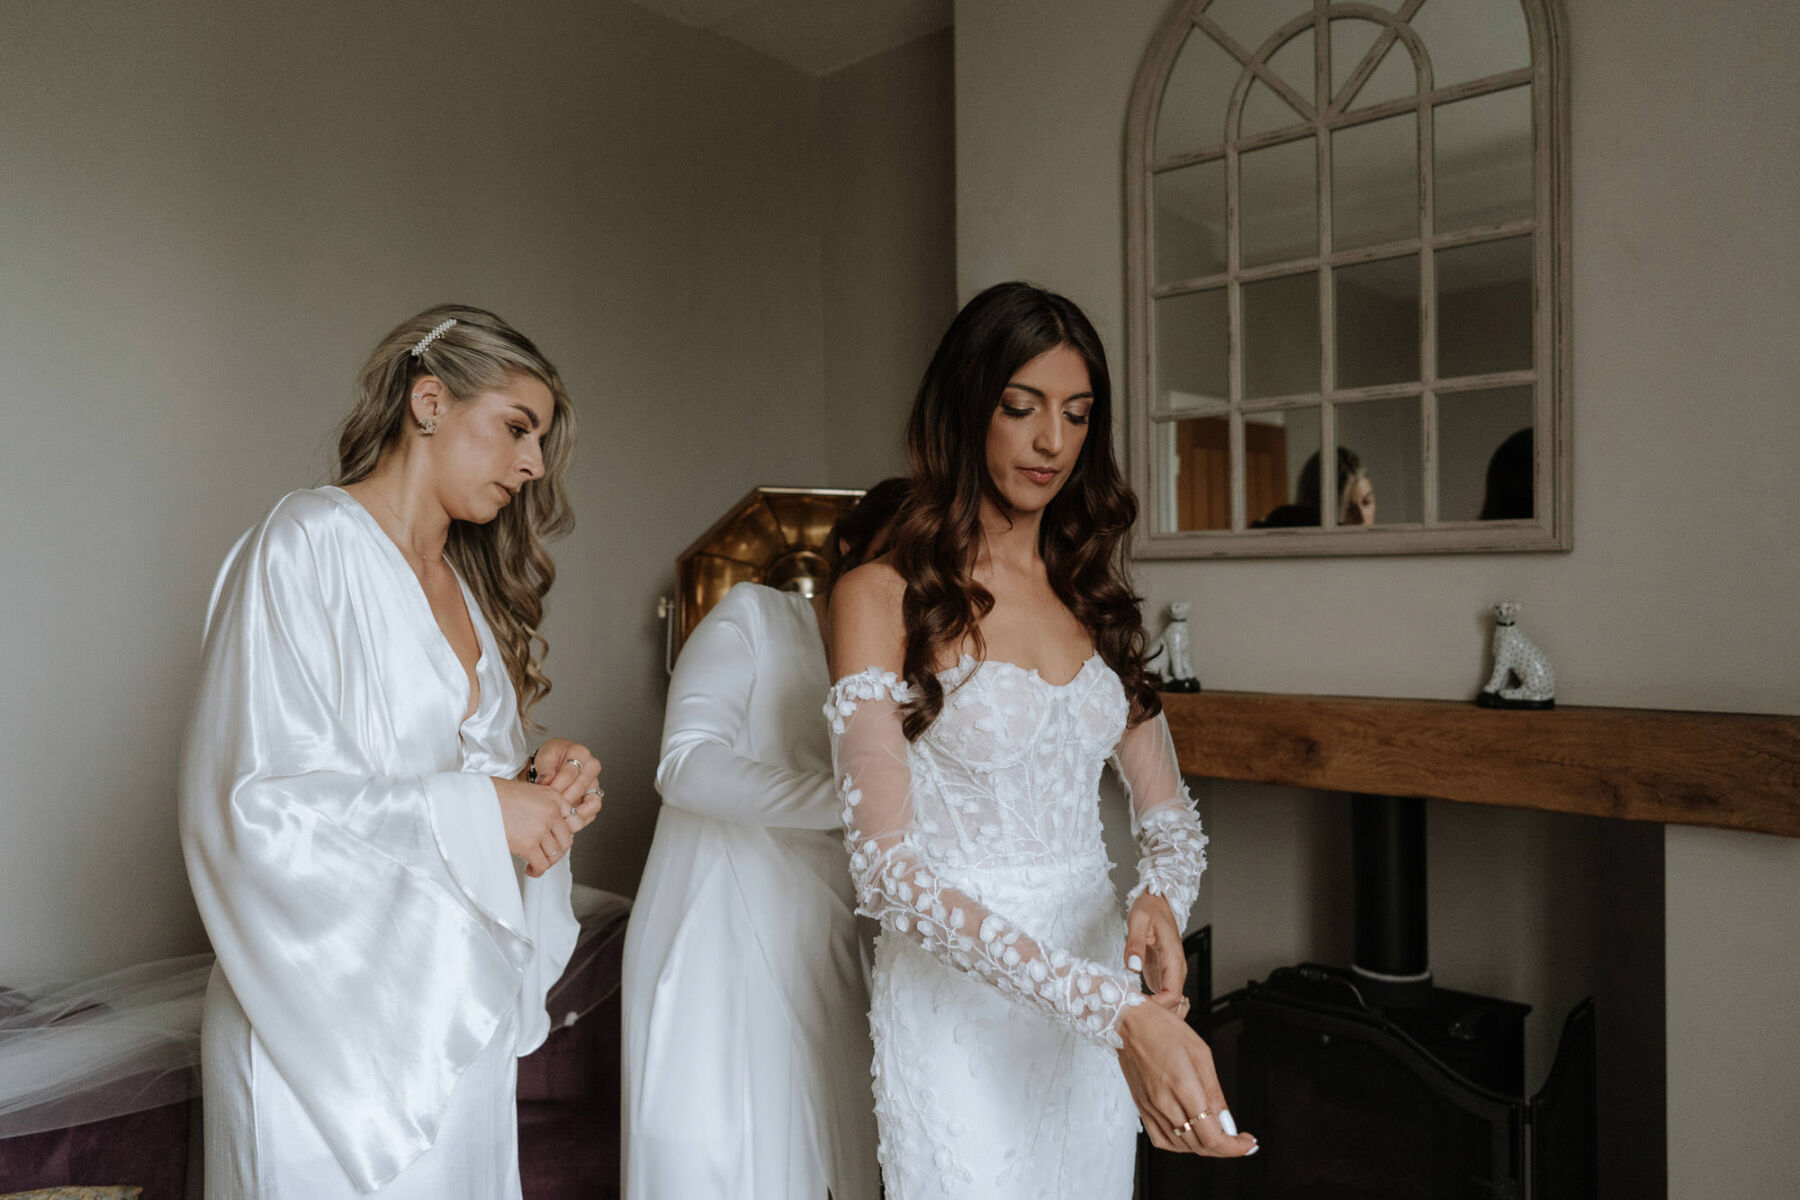 Bride getting ready in her Hadi Lane fitted, floral wedding dress. Bridesmaids in white dresses.